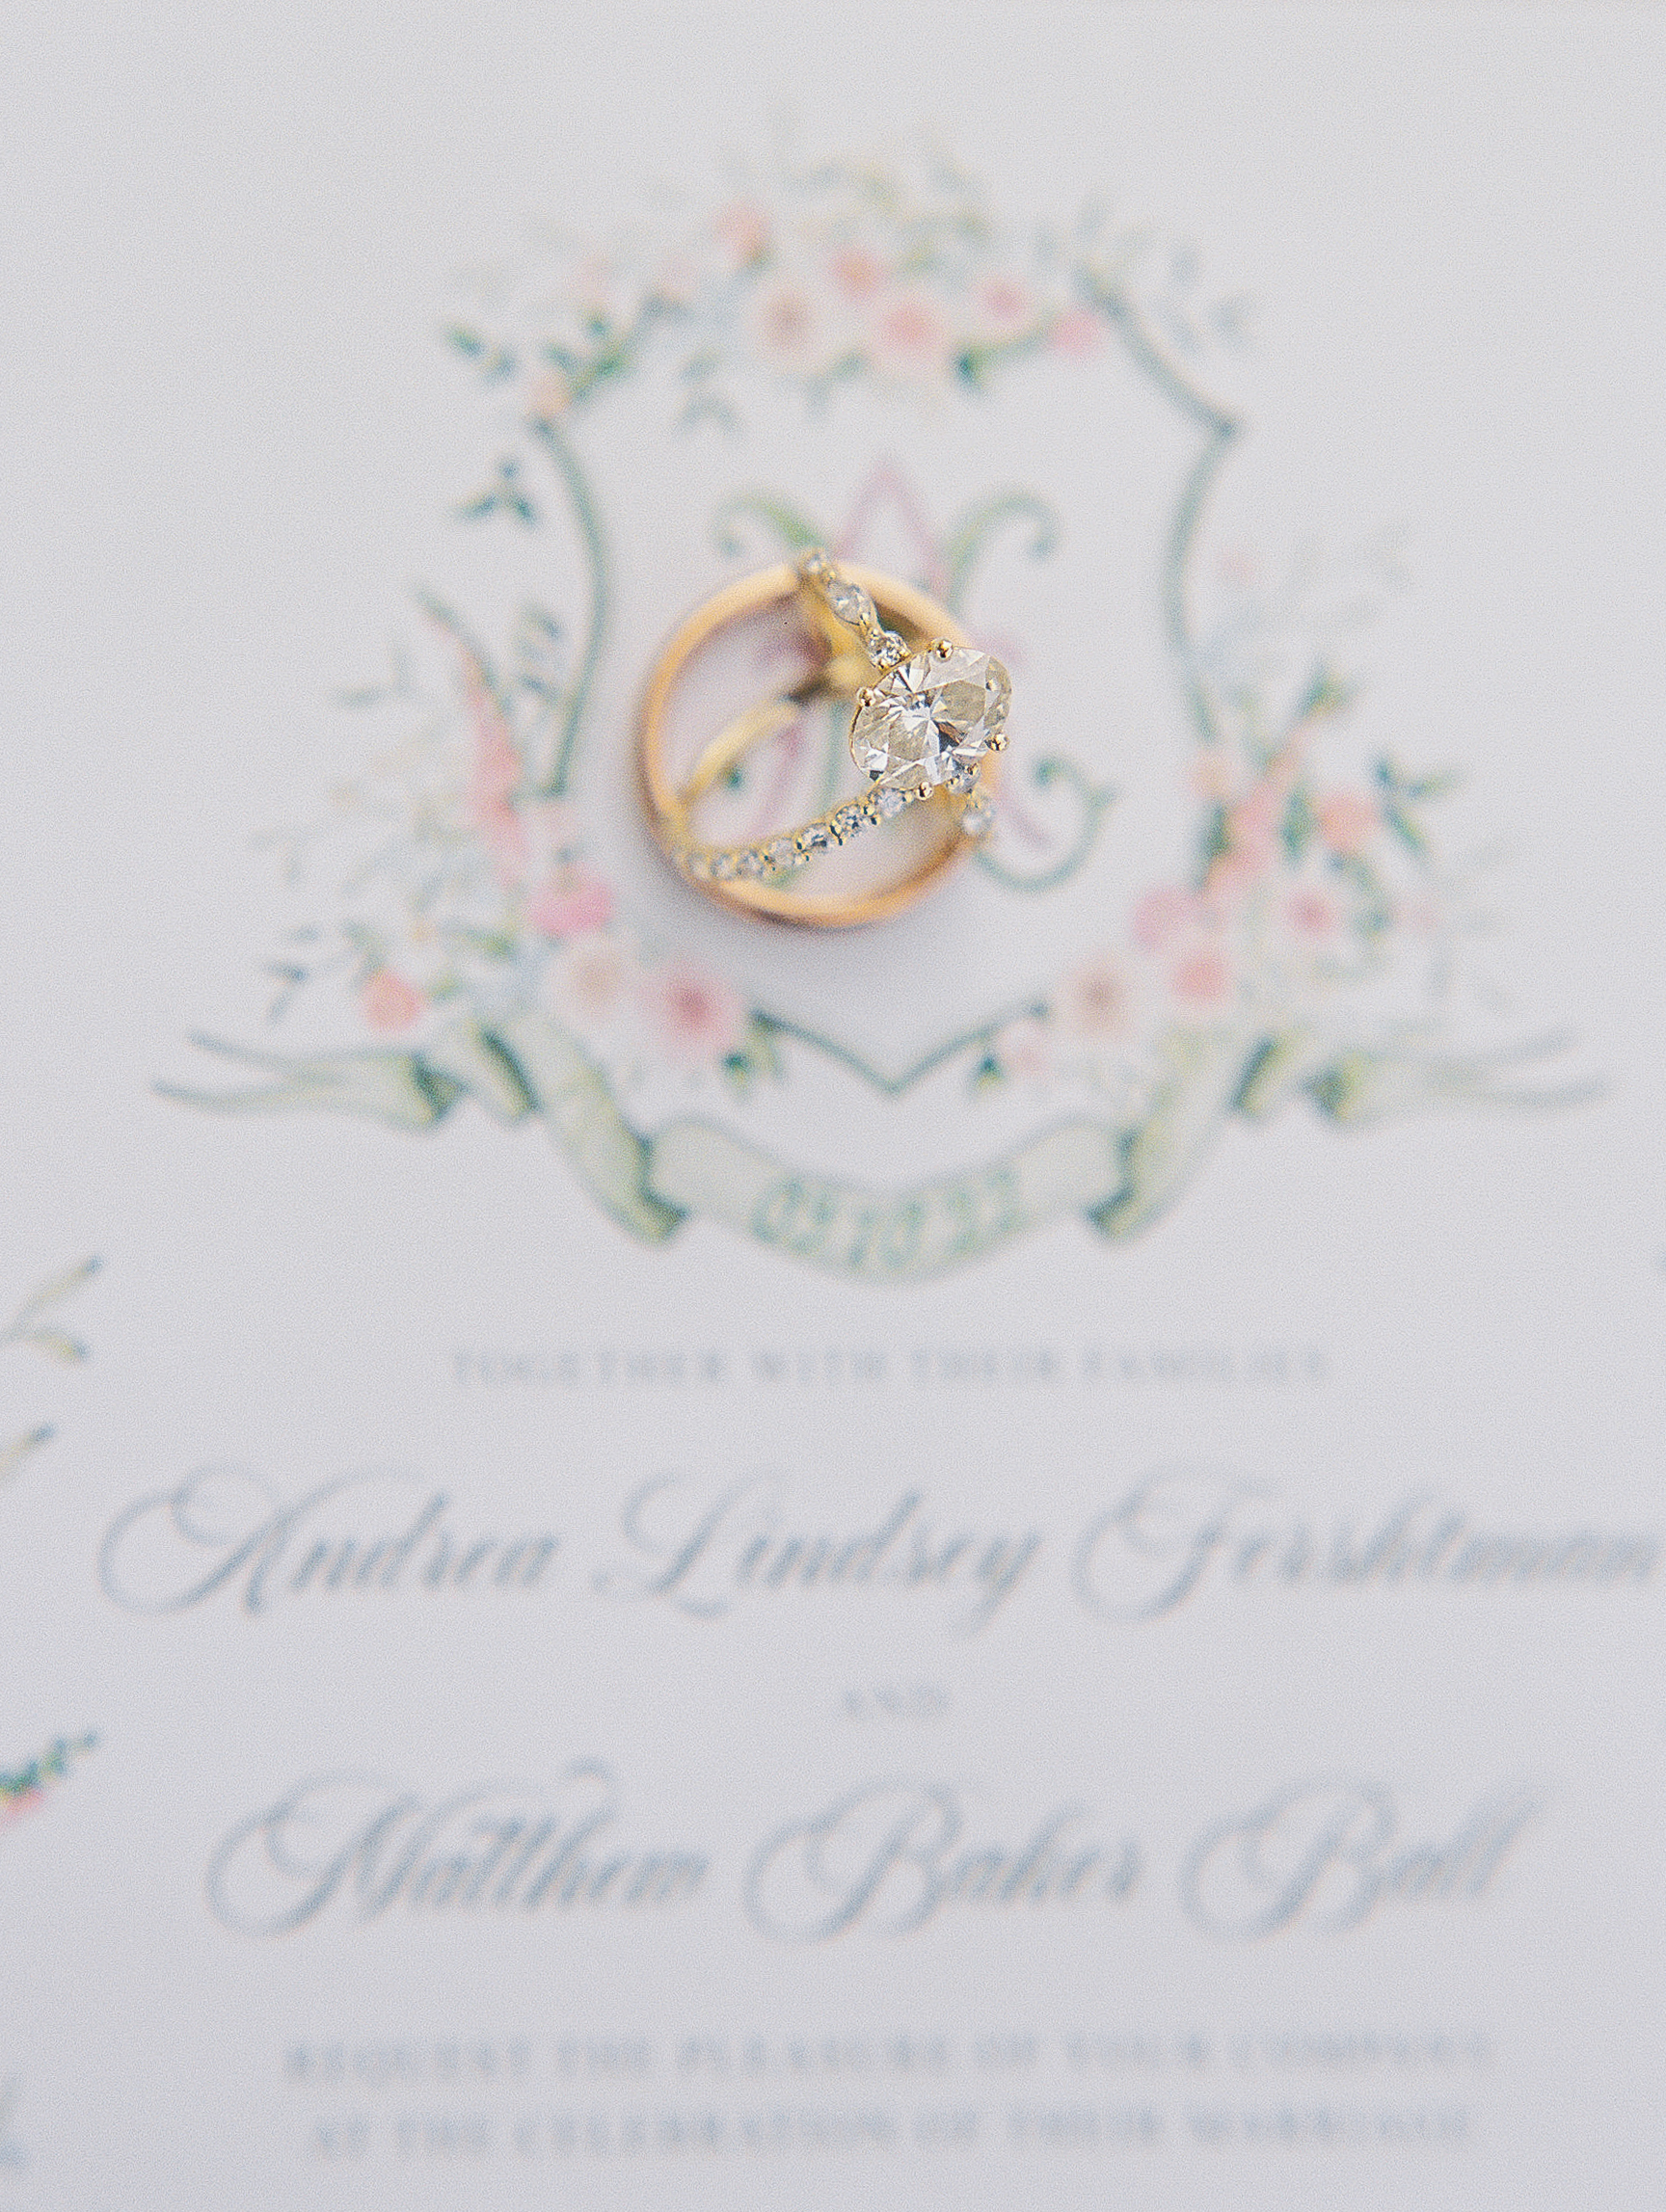 Display of wedding rings atop wedding invitations for New Hampshire Wedding Photography